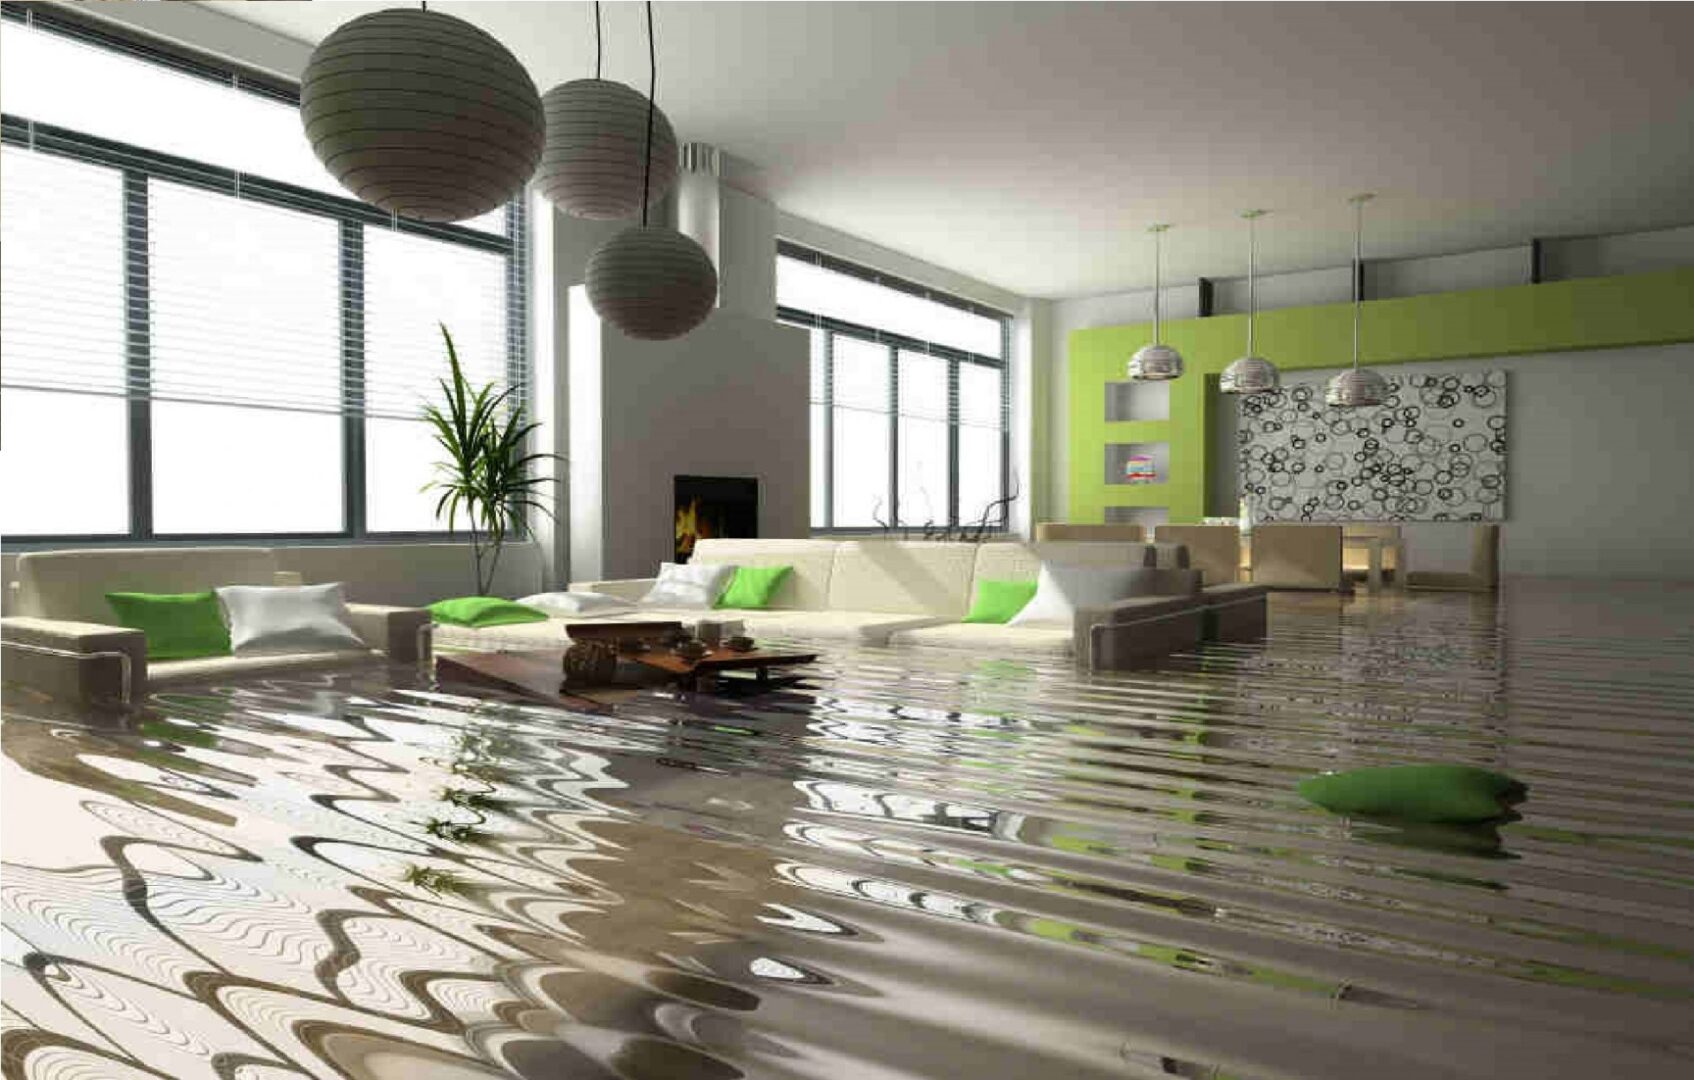 A flooded room